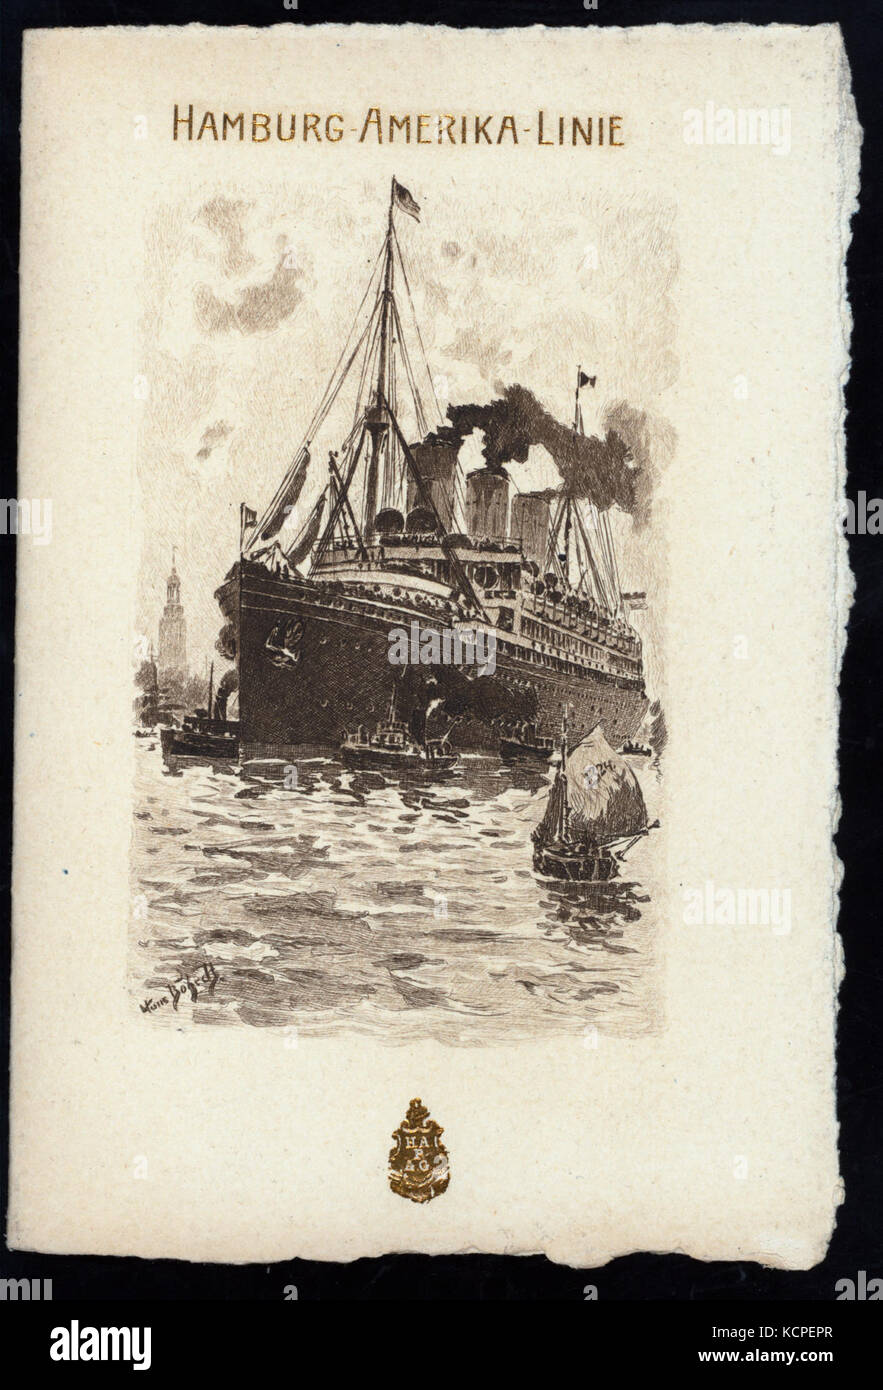 DINNER (held by) HAMBURG AMERIKA LINIE (at) EN ROUTE ABOARD EXPRESS STEAMER FURST BISMARCK (SS;) (NYPL Hades 277024 469419) Stock Photo